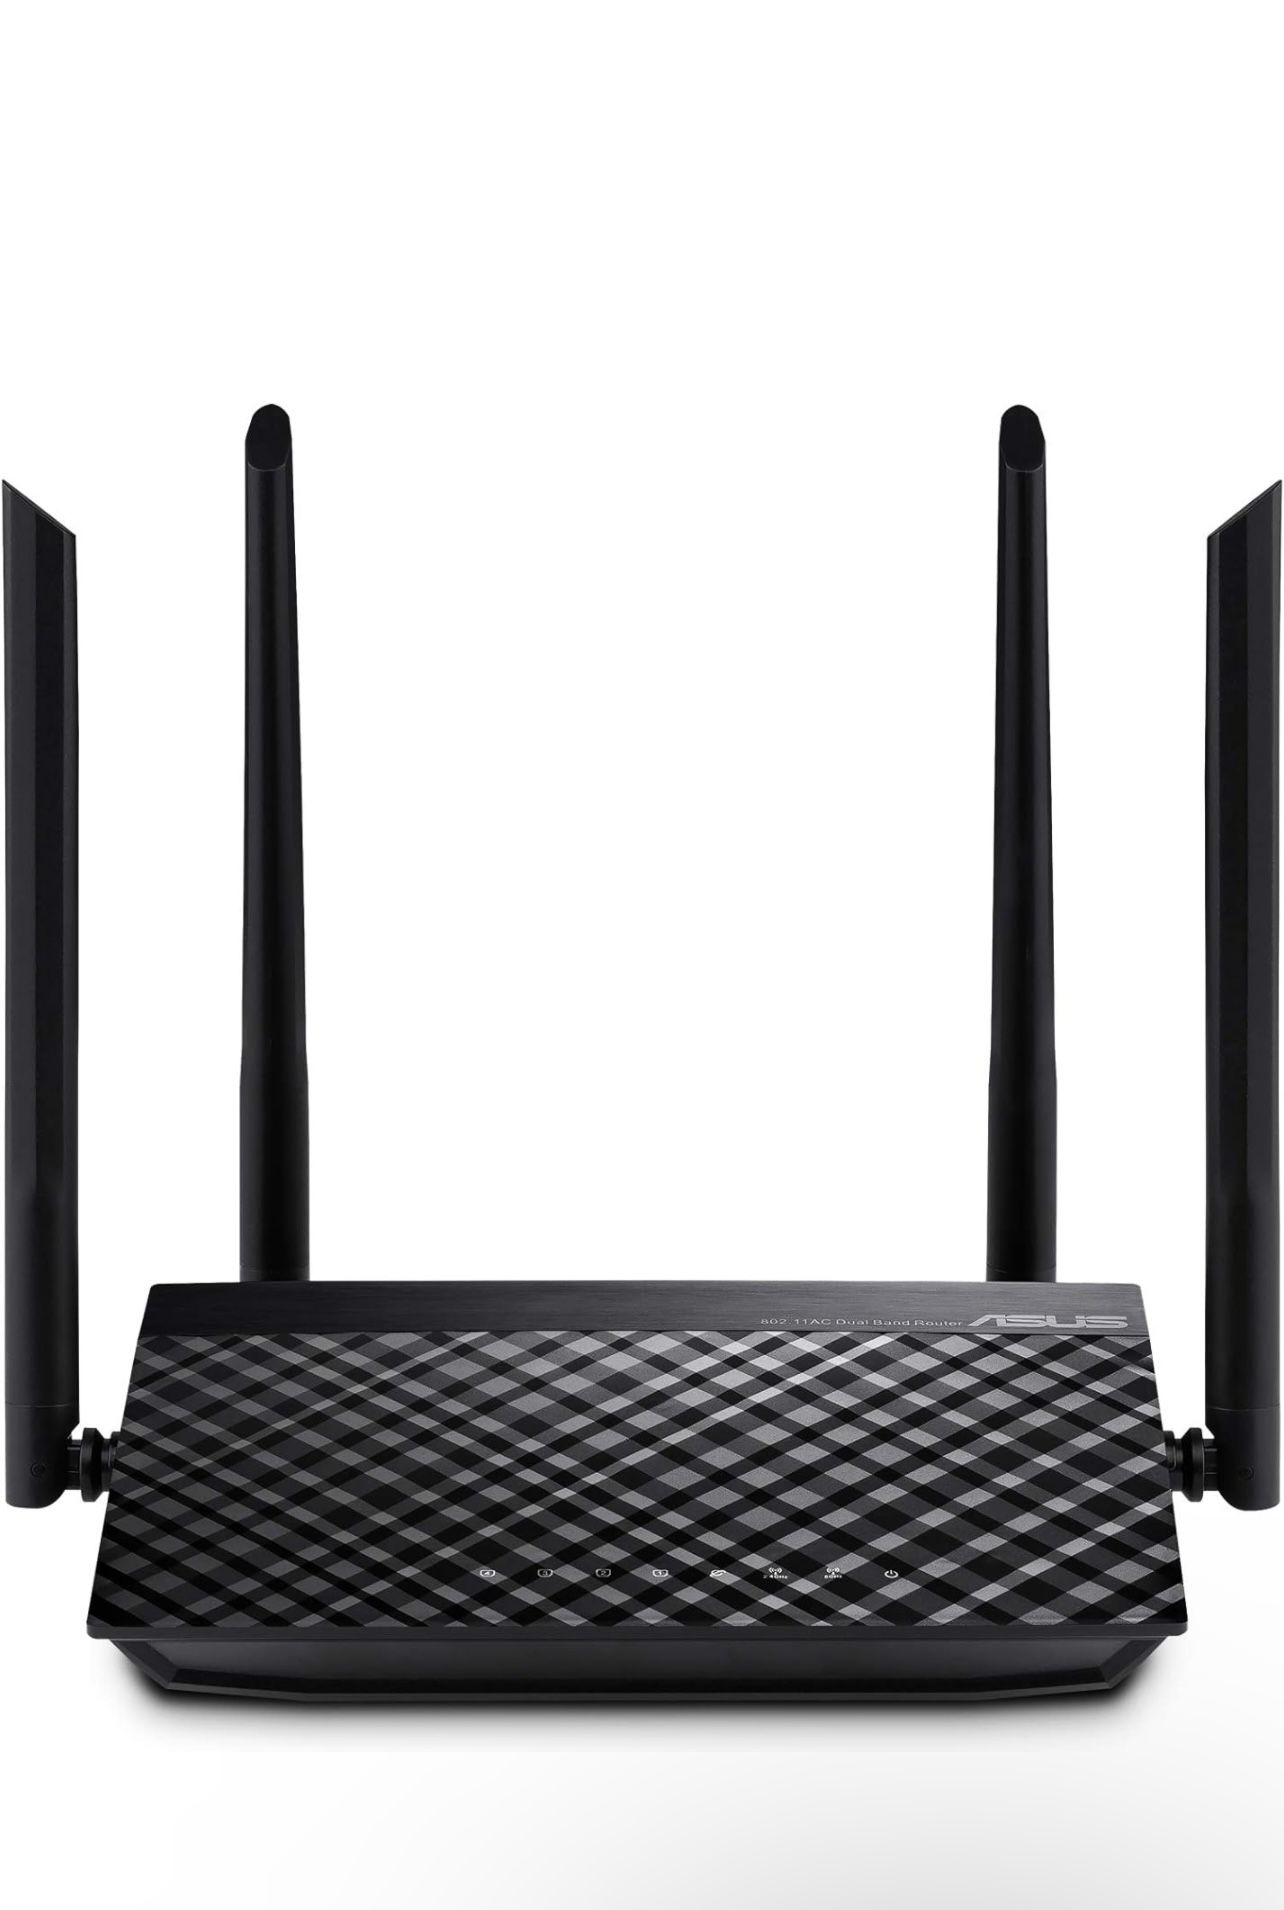 ASUS WiFi Router 